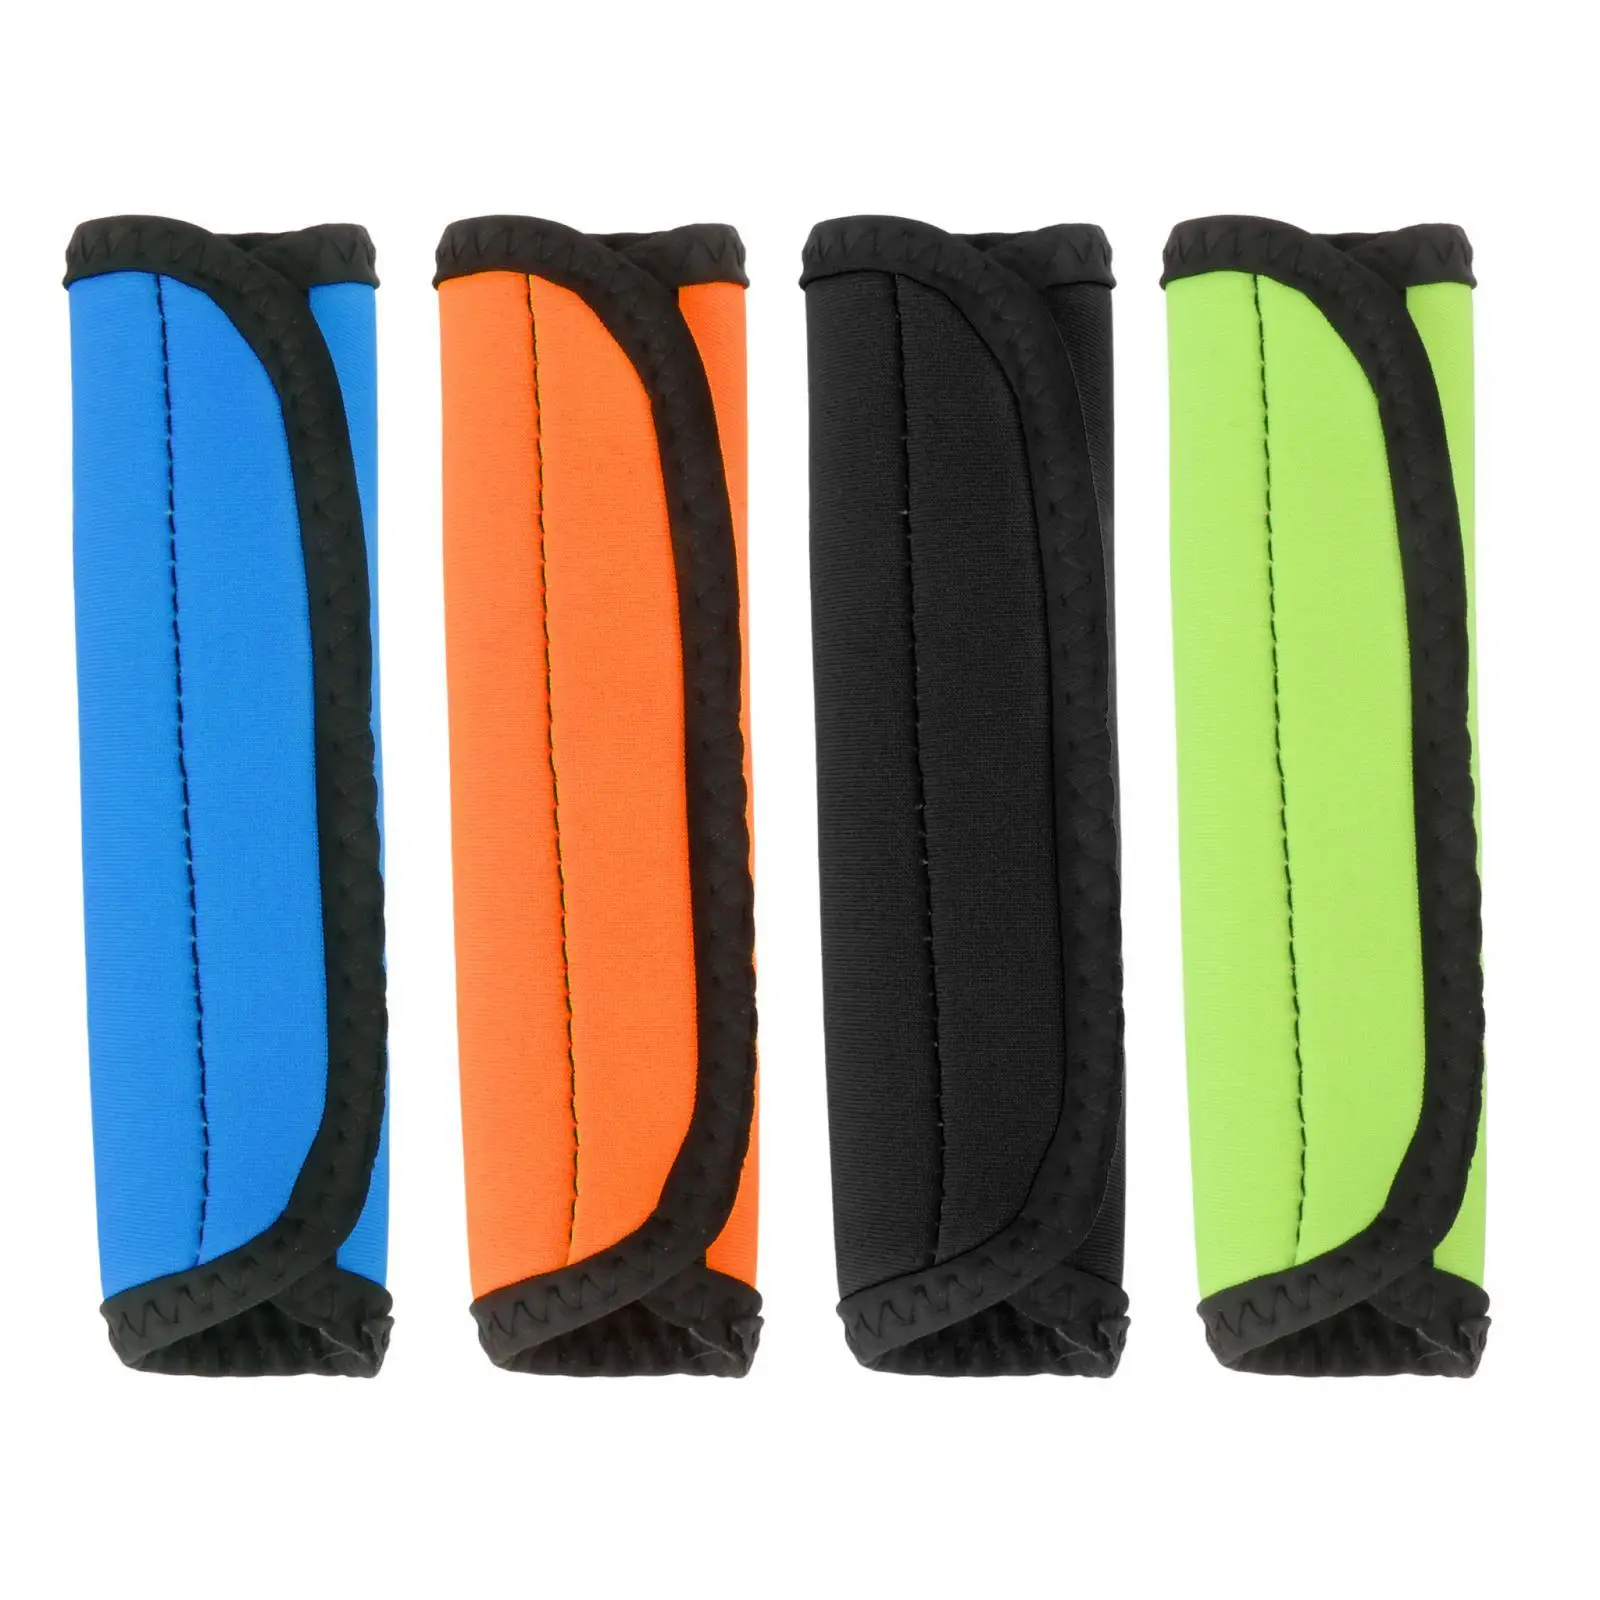 Diving Snorkel Protective Sleeve Snorkeling Adult Lightweight Case Snorkel Protective Covers for Floating Swimming Water Sports